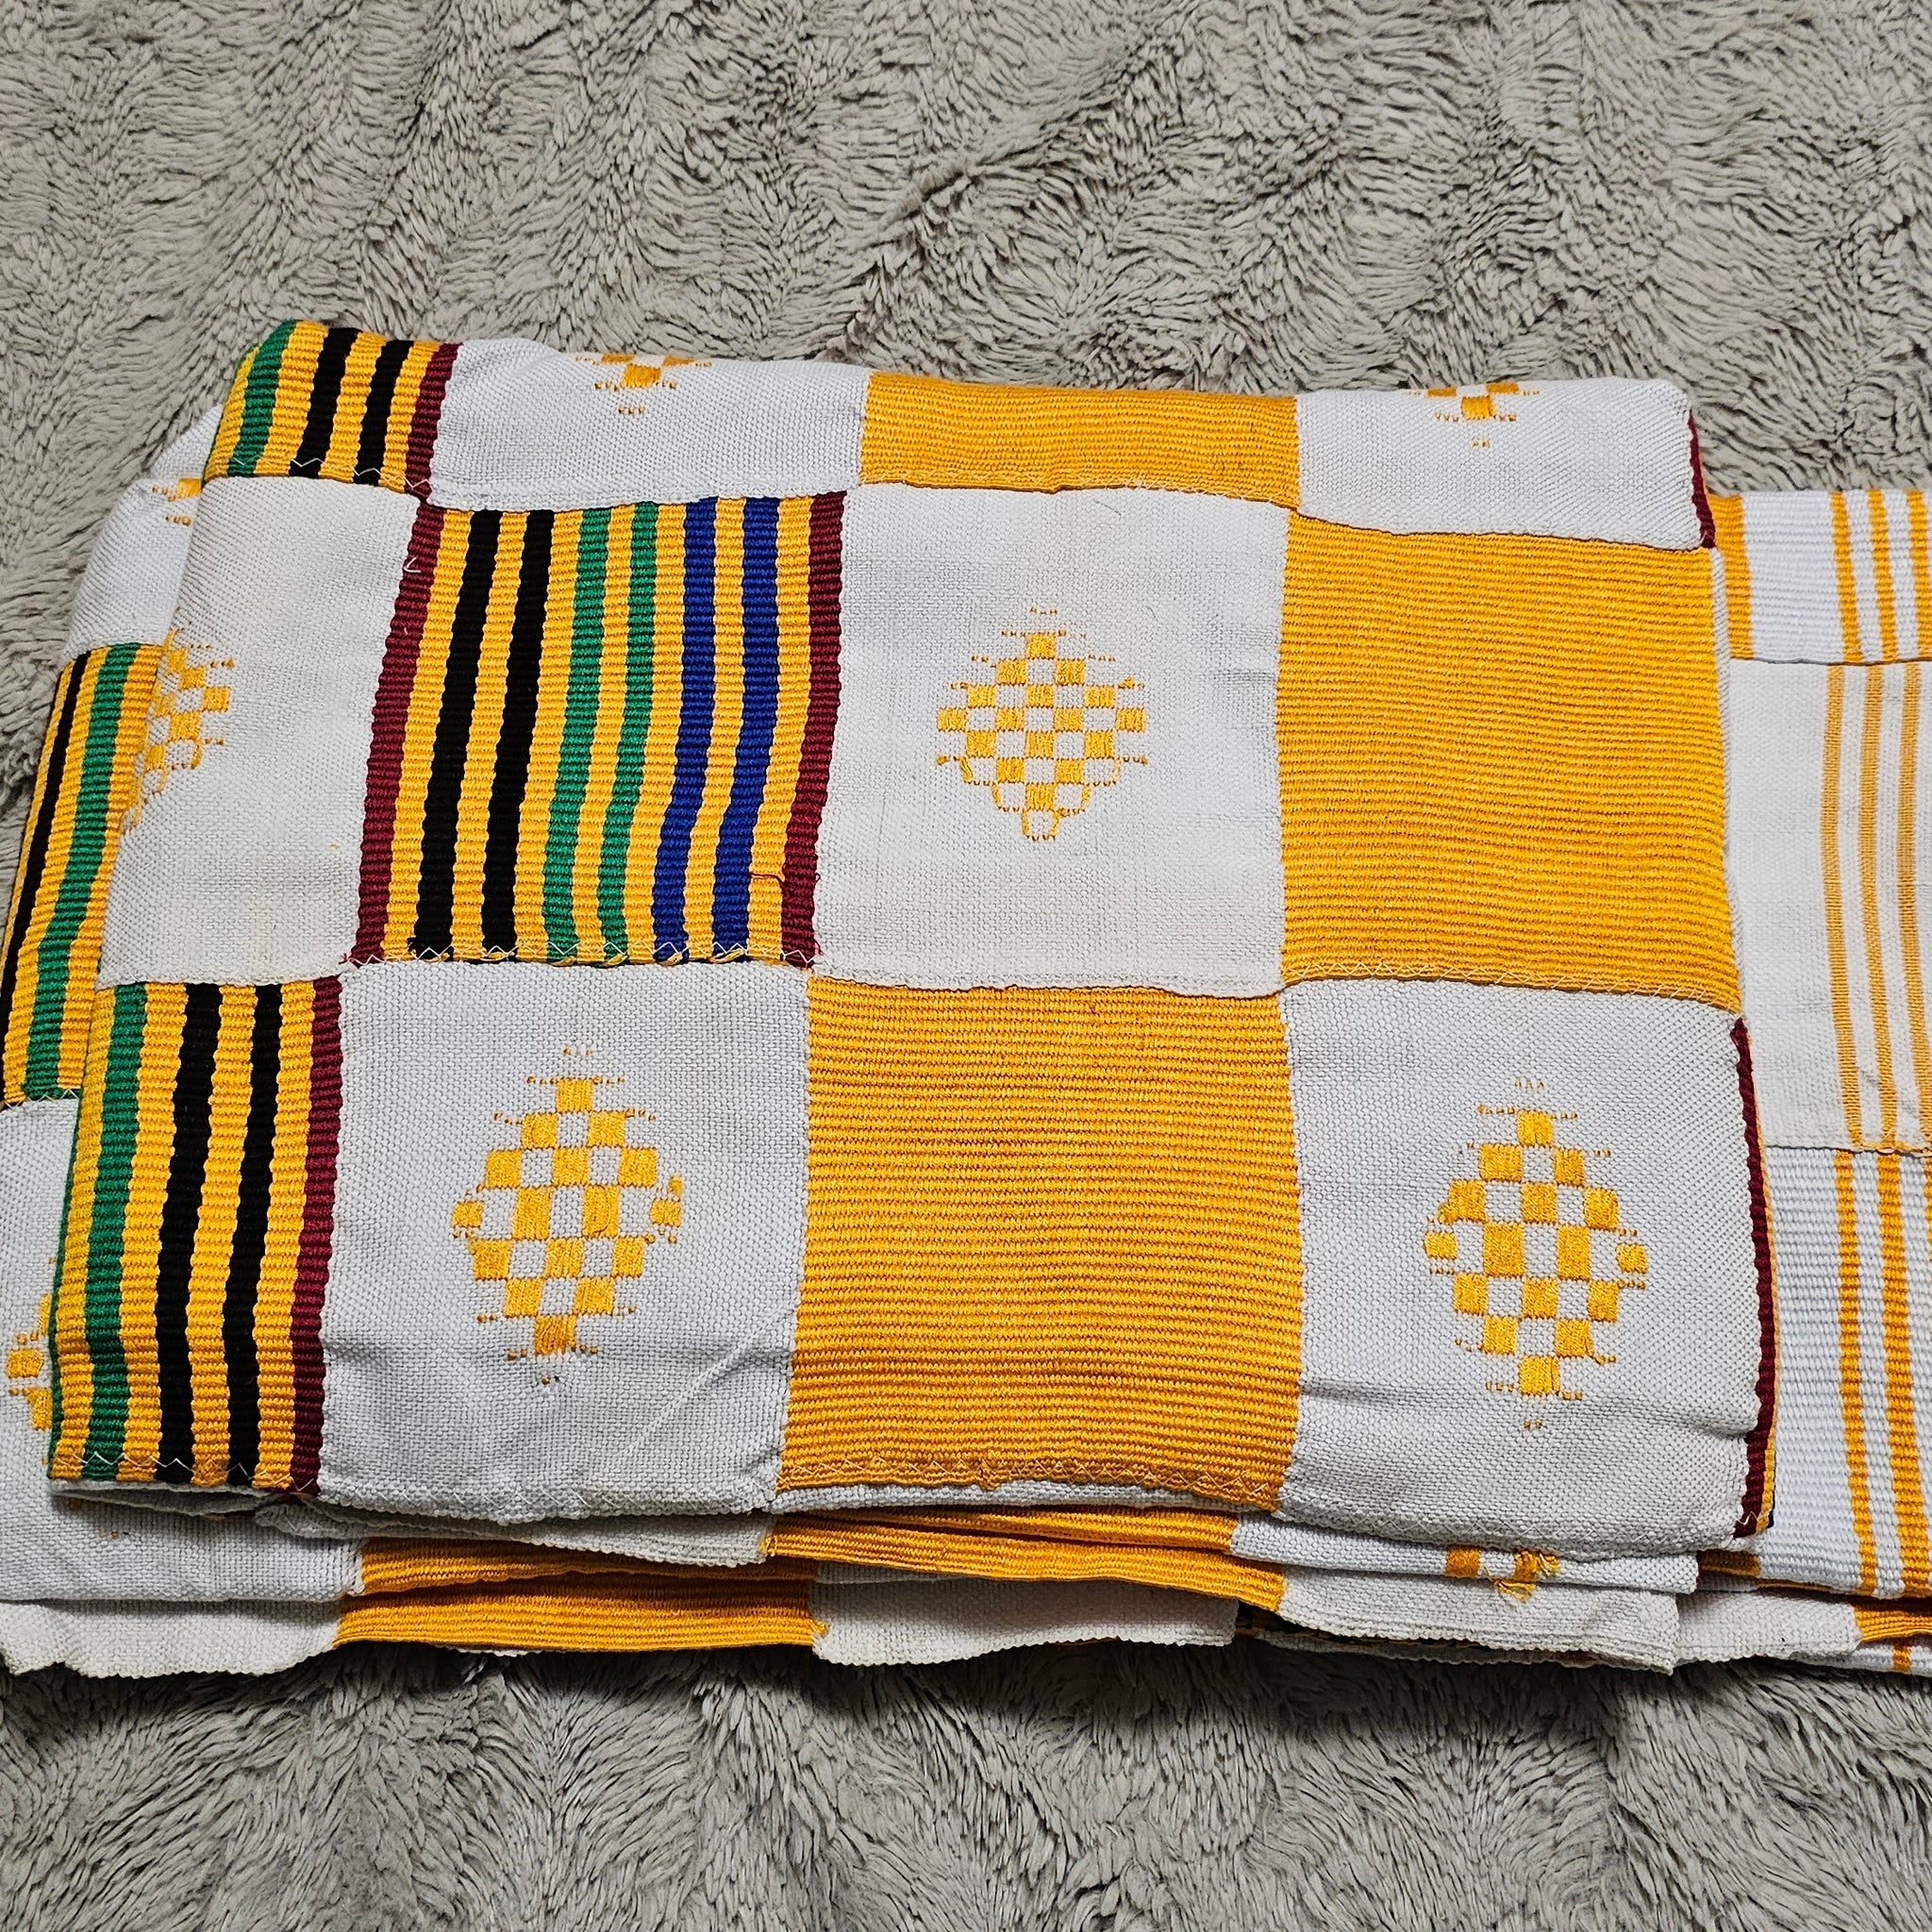 Clearance Authentic Kente Cloth item. 10 Yards